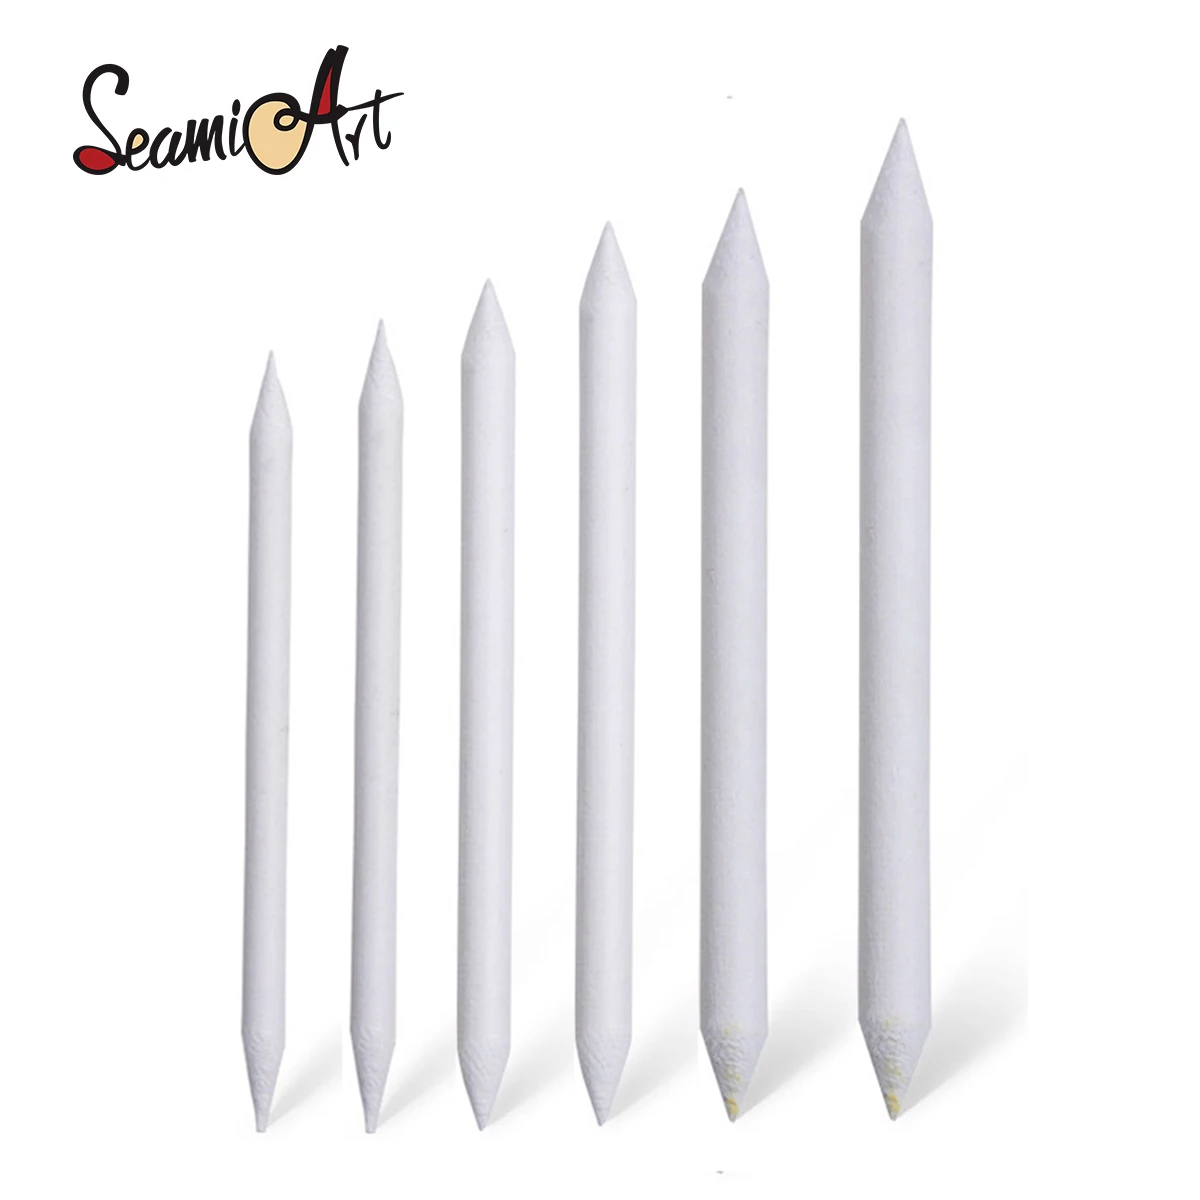 6pcs/set Blending Smudge Stump Stick Tortillon Sketch Art White Drawing Charcoal Sketcking Tool Rice Paper Pen Supplies healifty color learning watercolor wheel class teaching tool for makeup blending painting